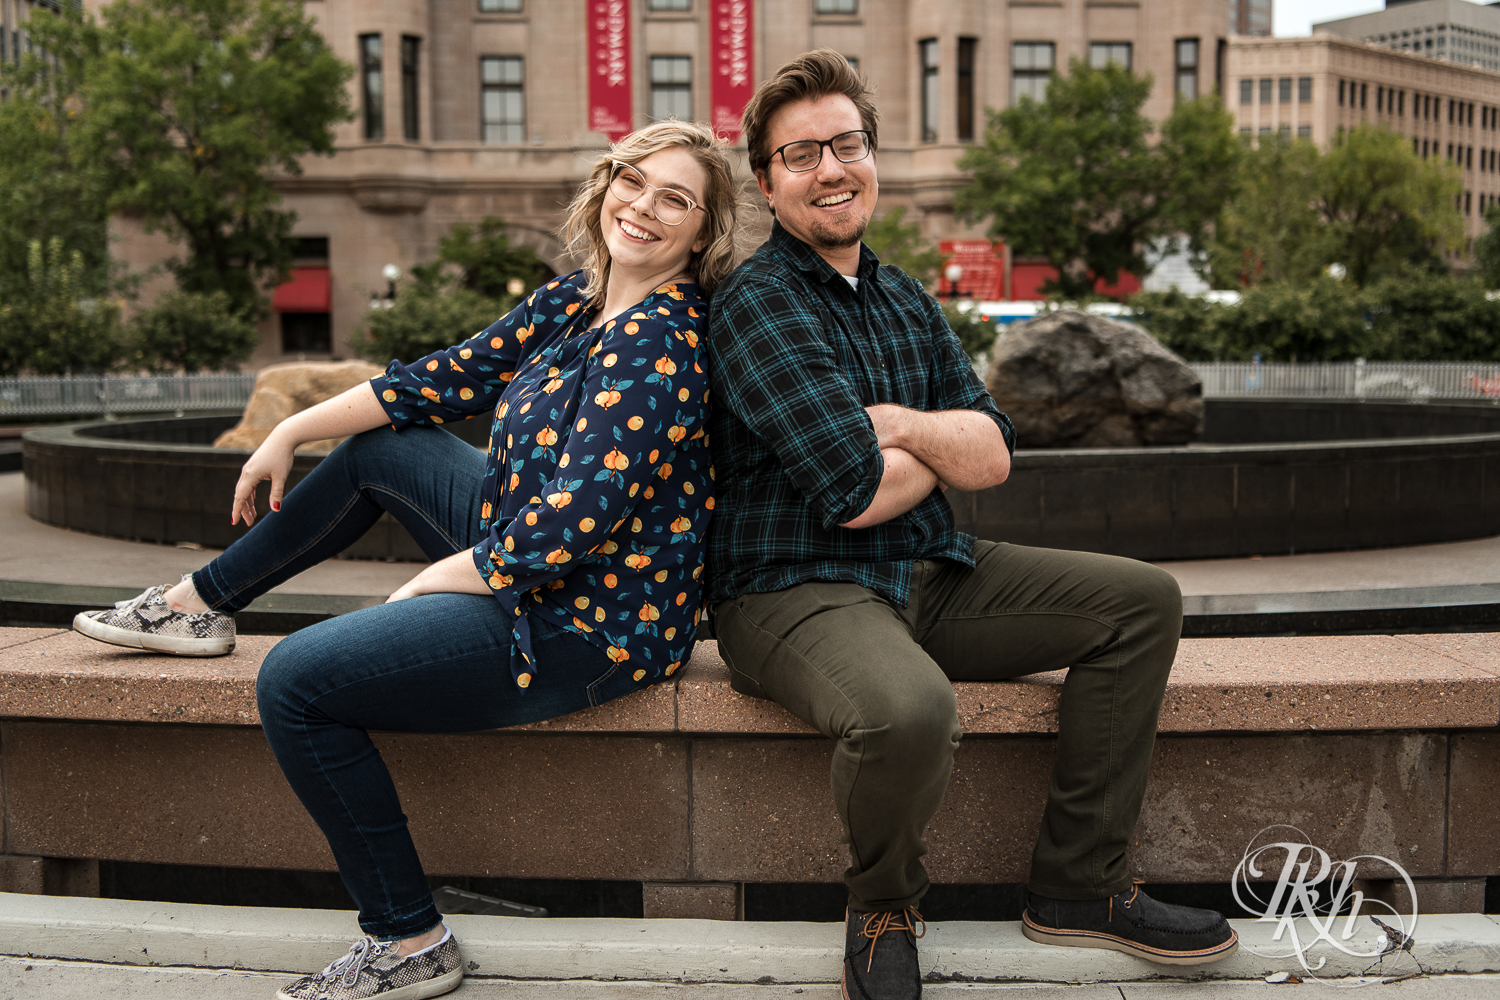 Blond woman with glasses and man with glasses smile in front of Landmark Center in Saint Paul, Minnesota.